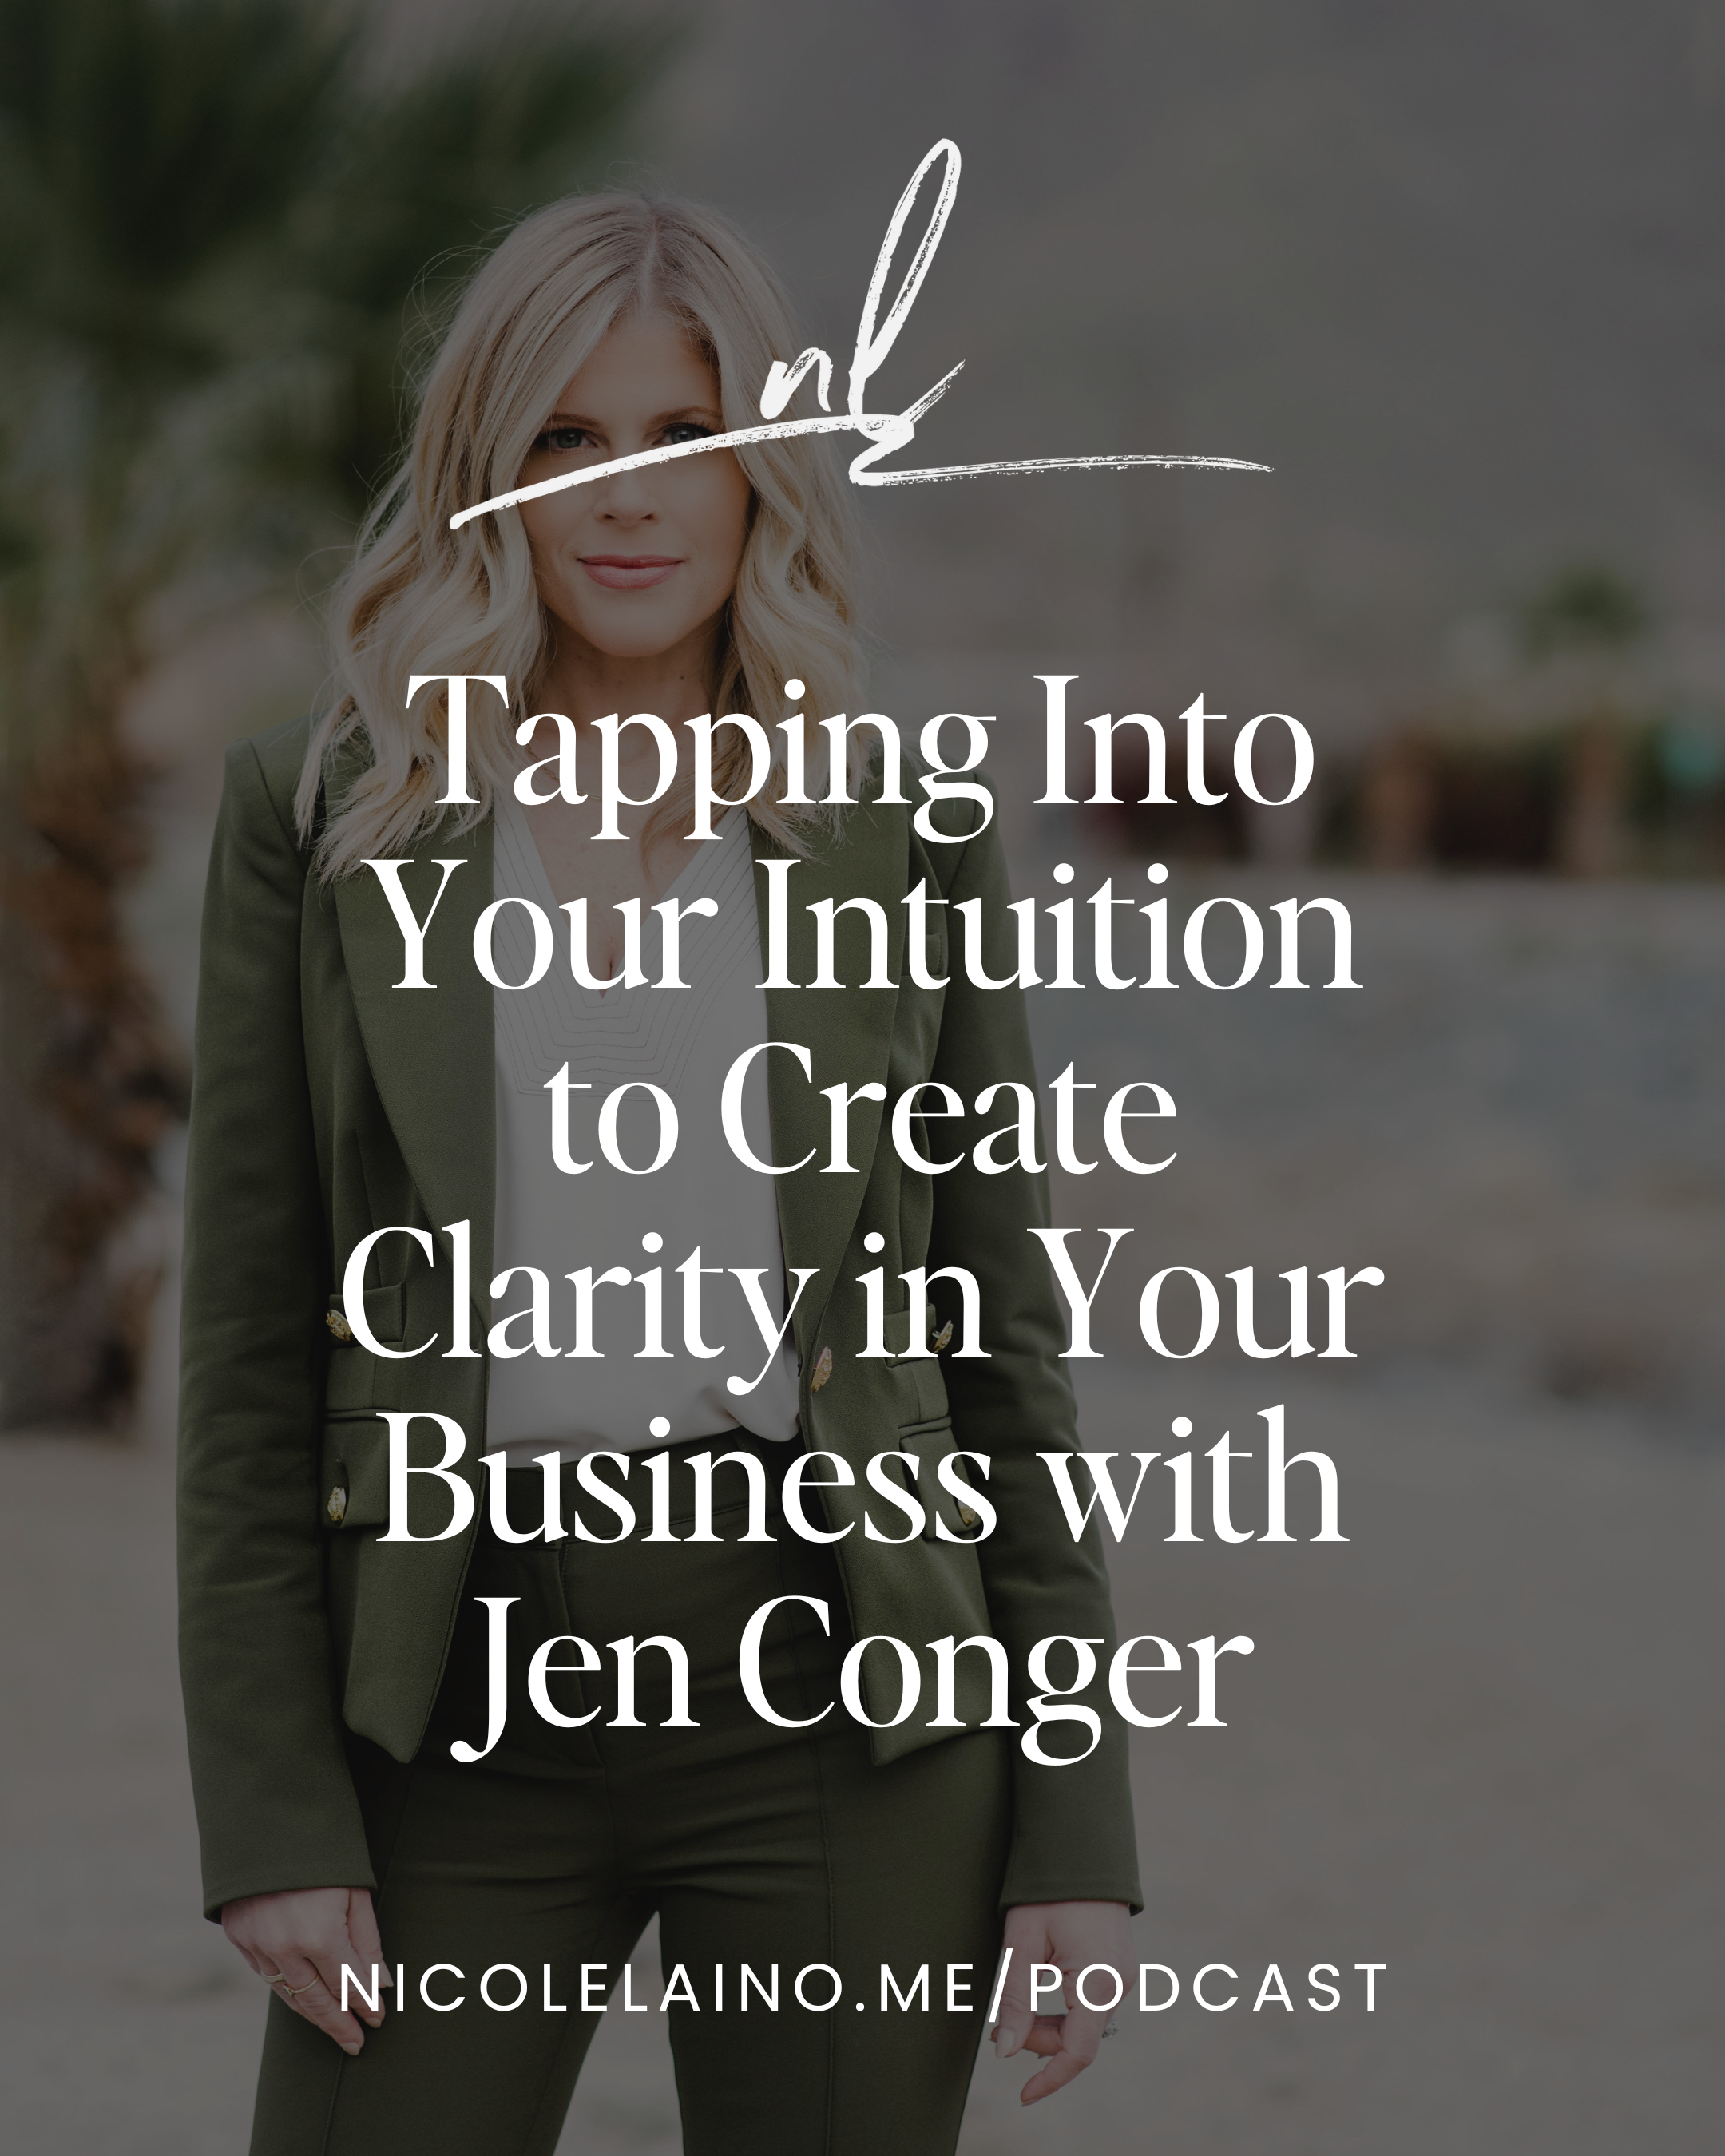 Tapping Into Your Intuition to Create Clarity in Your Business with Jen Conger